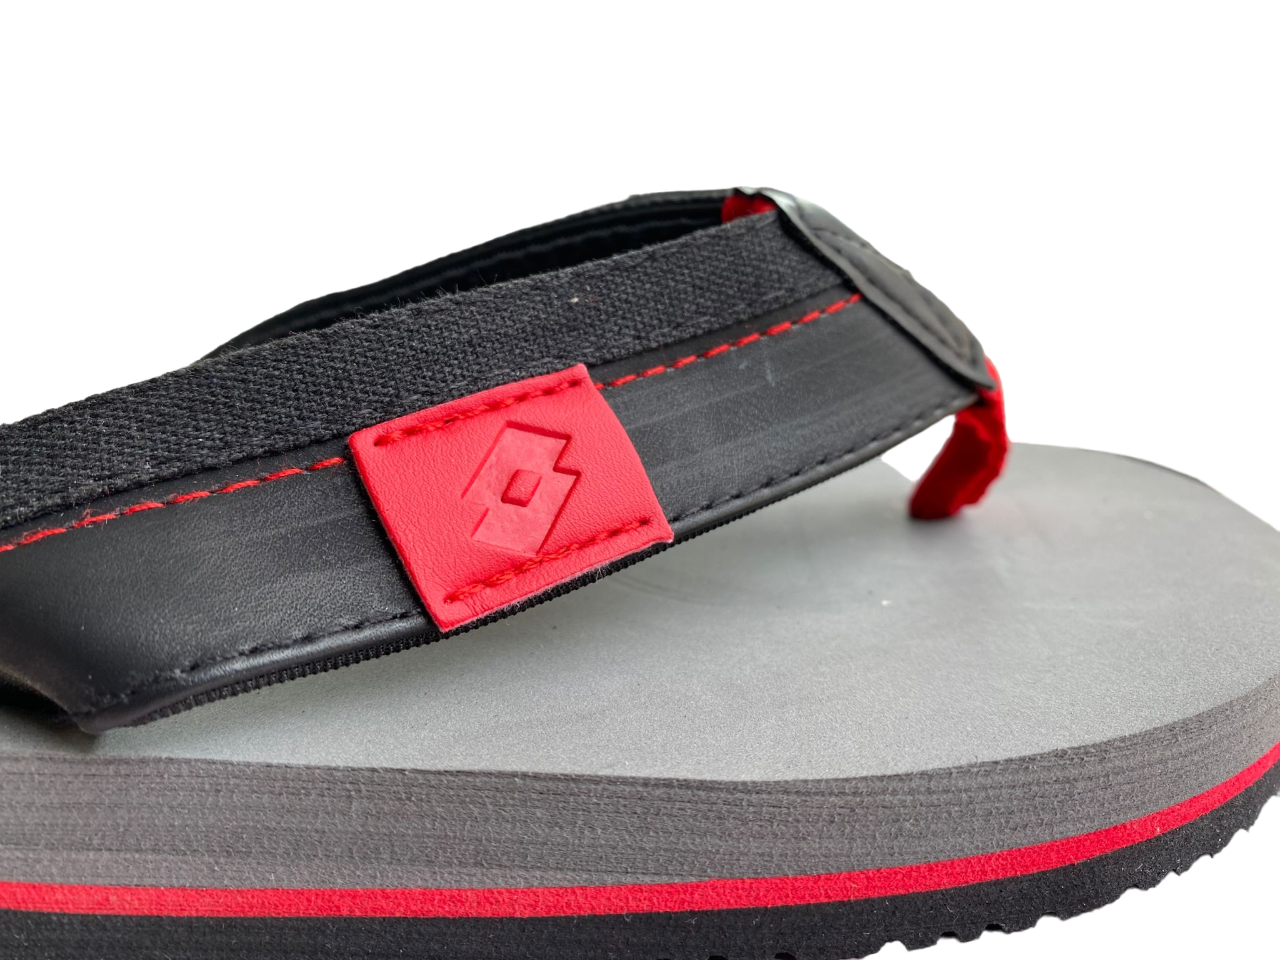 Lotto Flip-flops for the sea swimming pool Skiatos Flip 219536 9T5 charcoal-all black